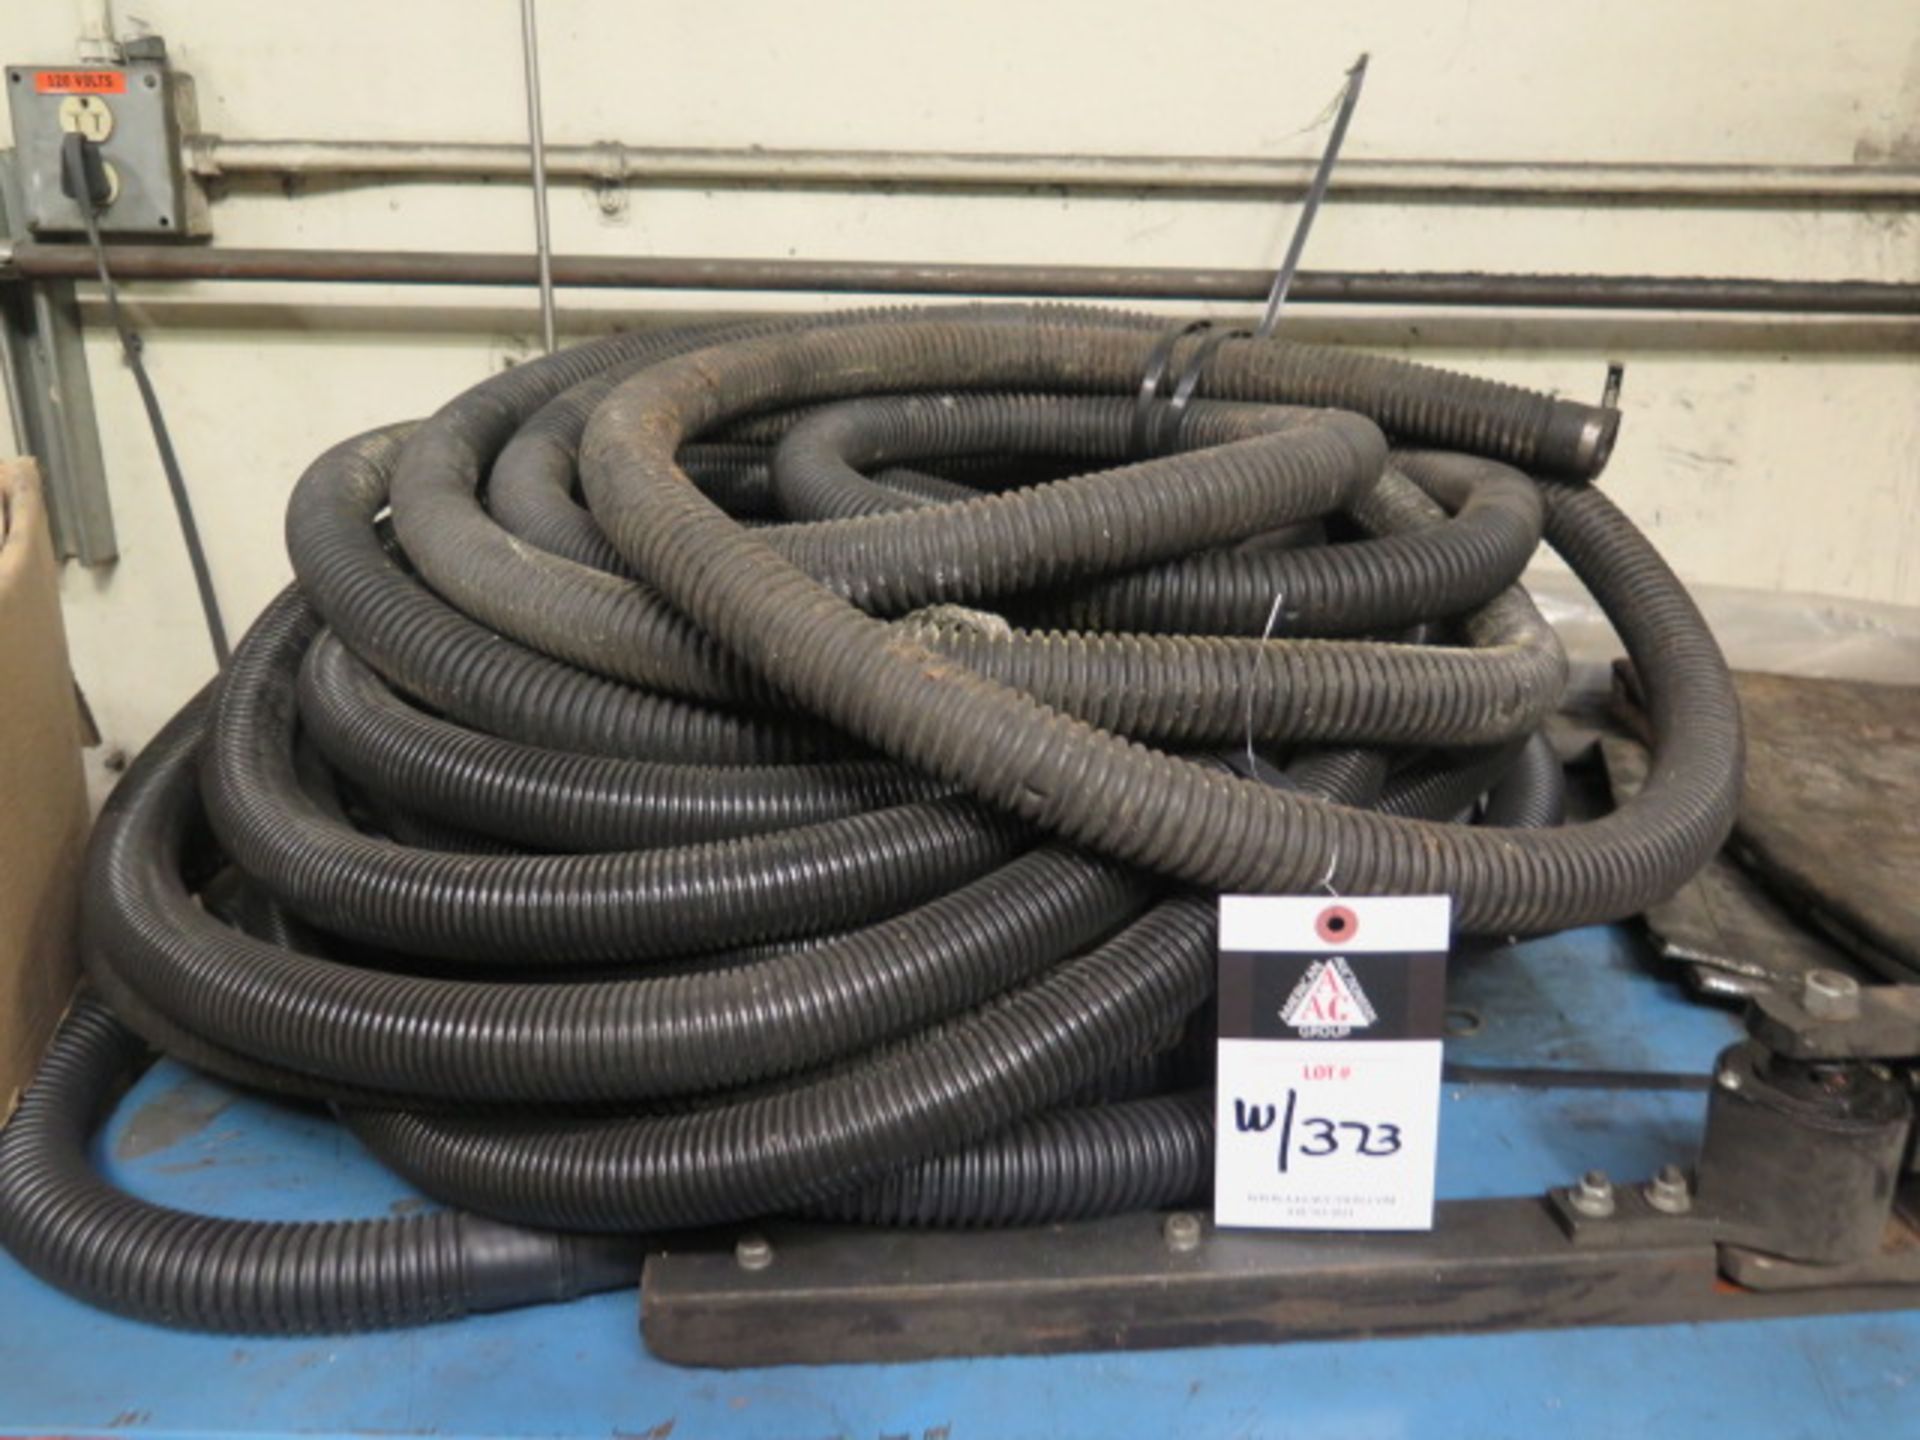 Storage Cabinet, Ice Box and Hoses (SOLD AS-IS - NO WARRANTY) - Image 4 of 5